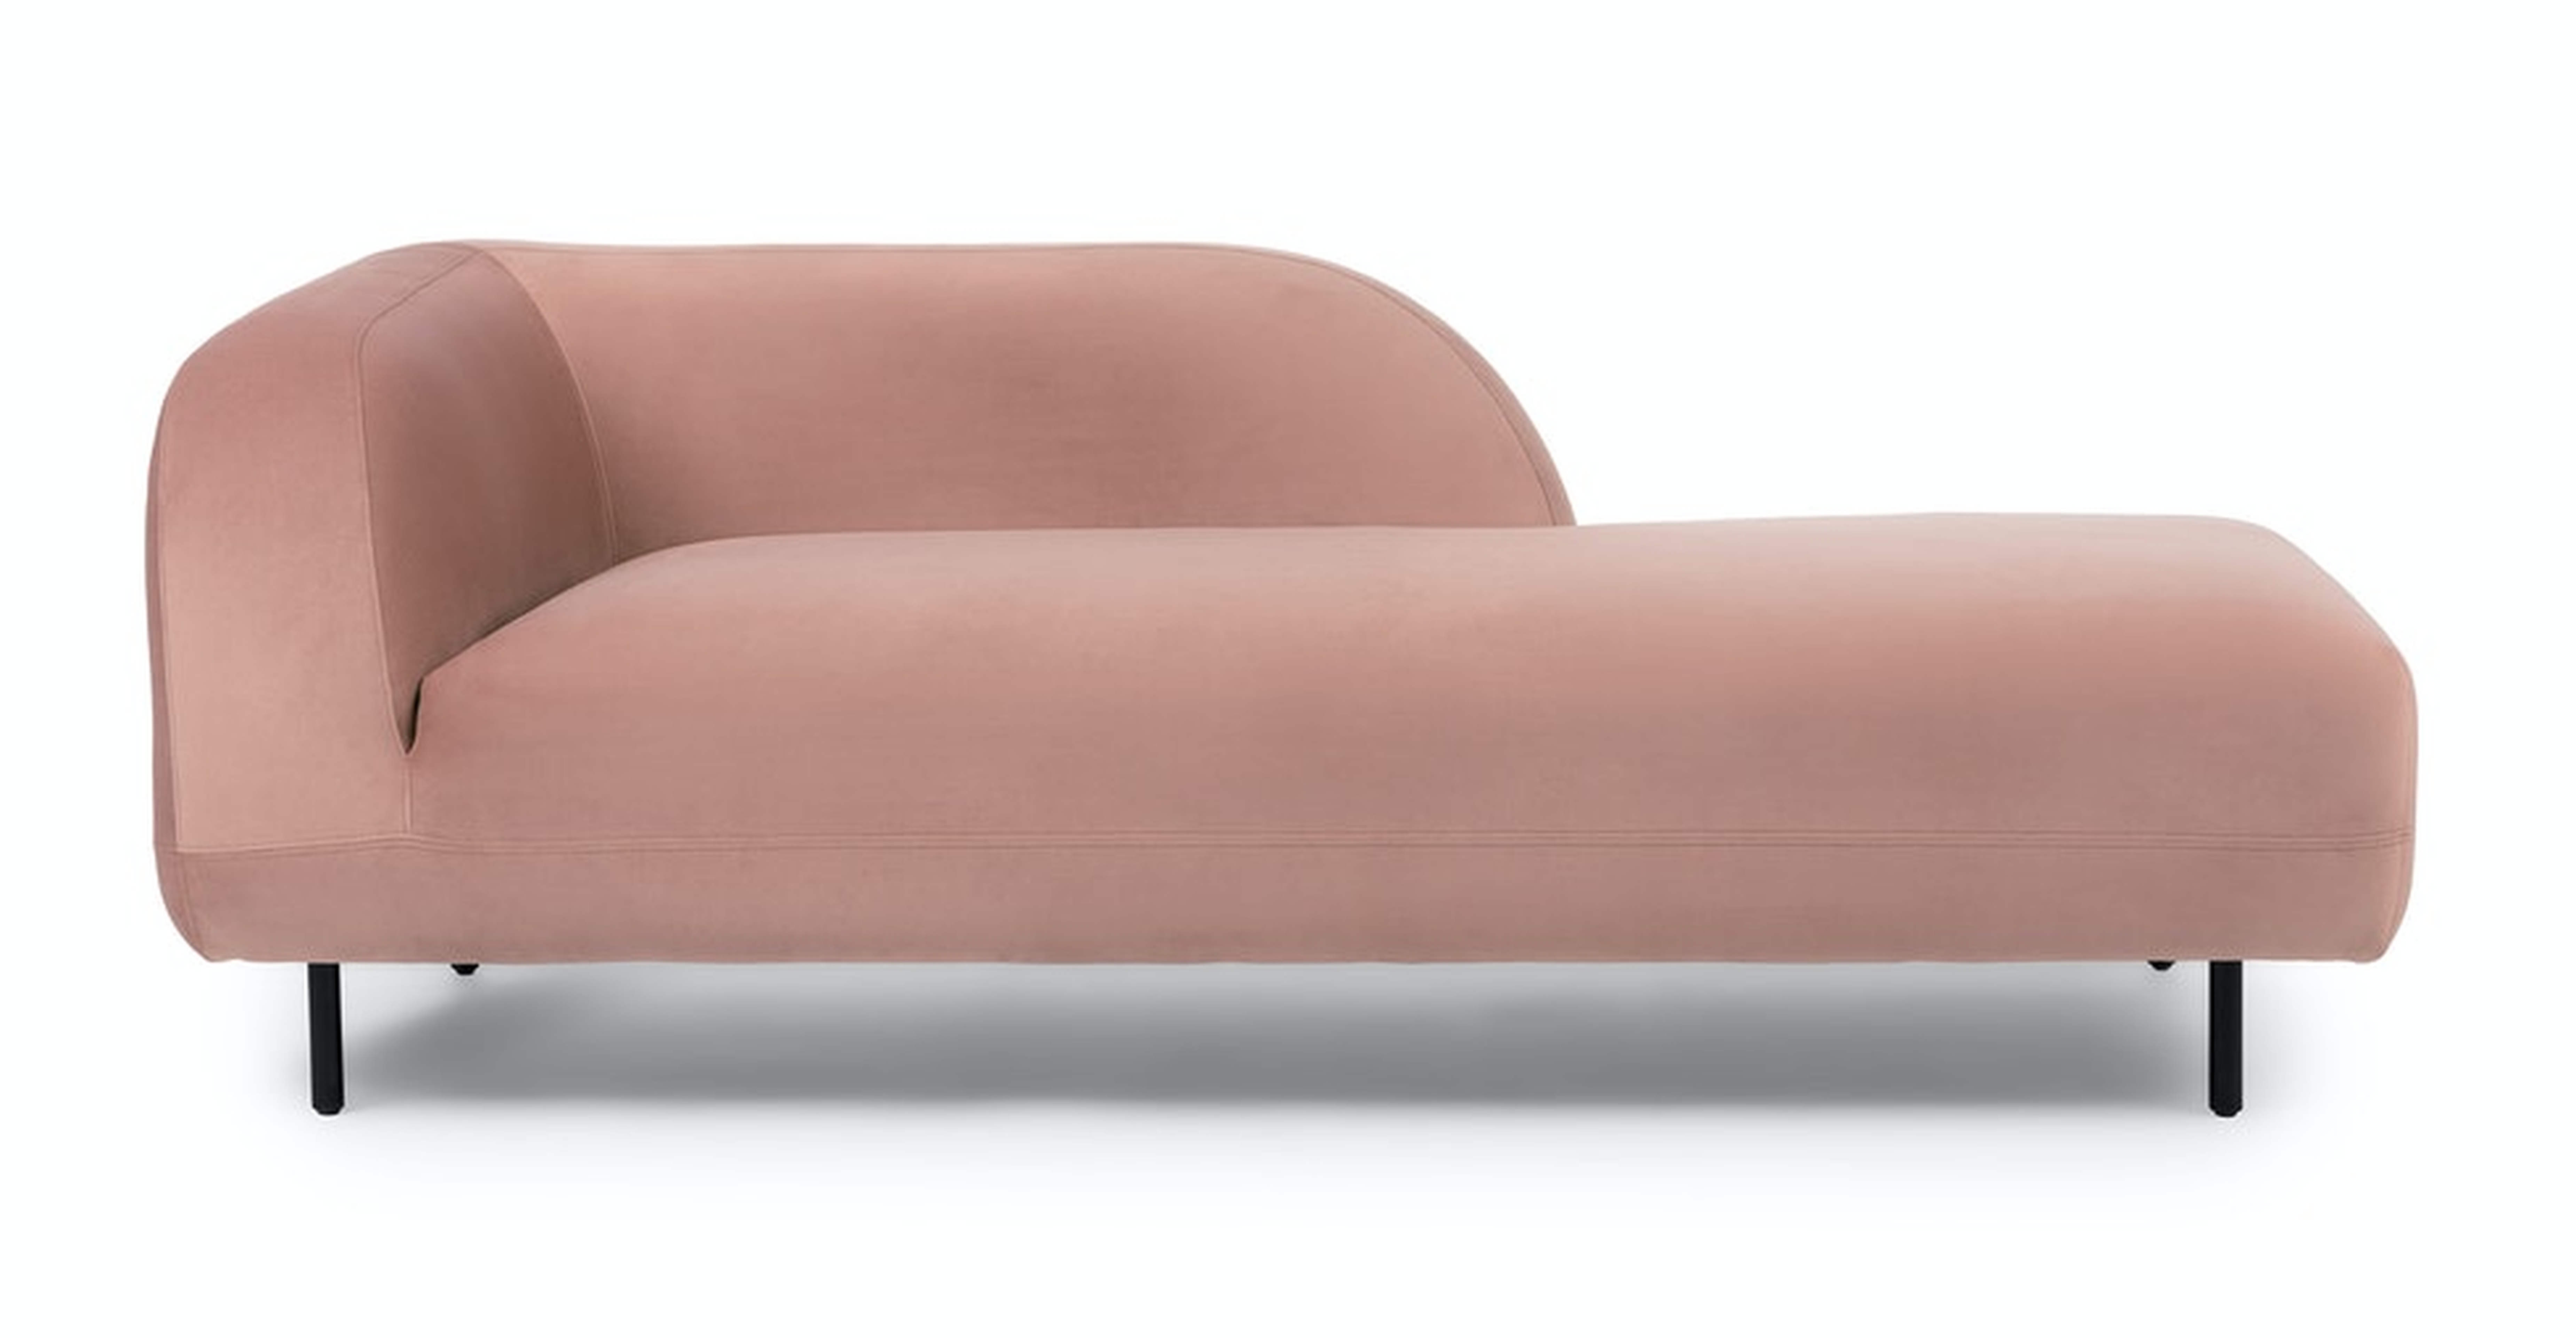 Lupra Daybed, Hibiscus Pink - Article